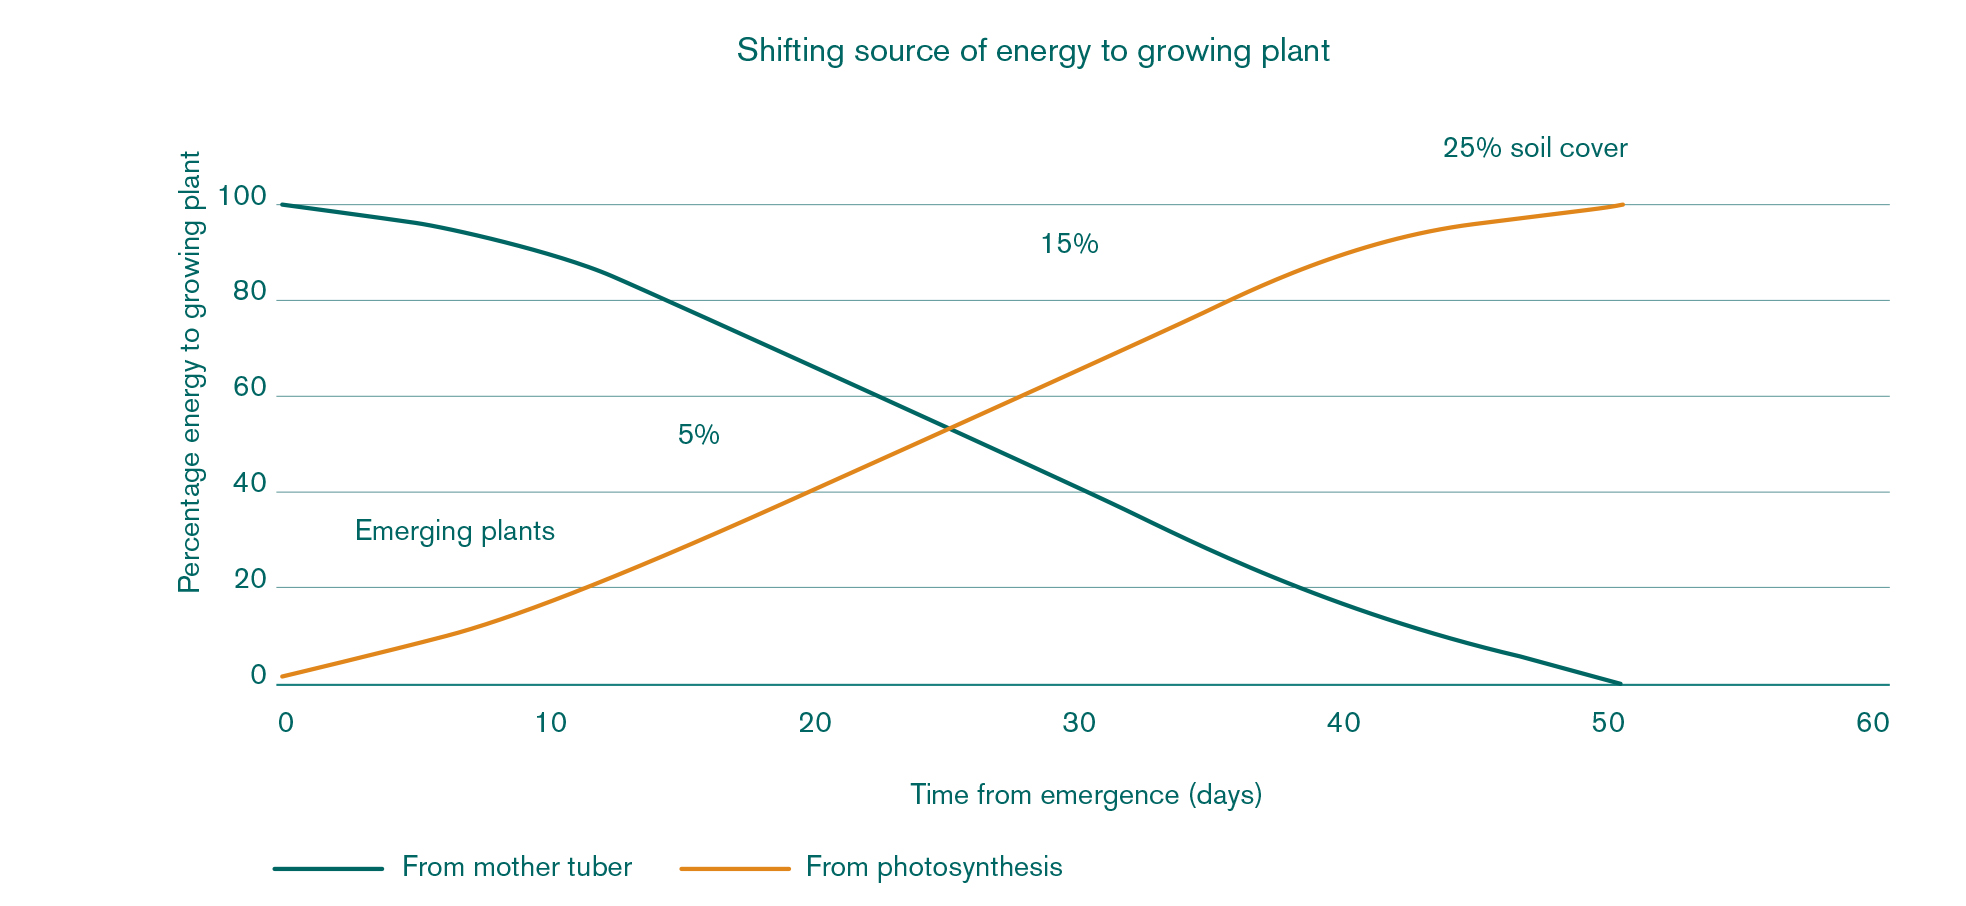 Shifting source of energy to growing plant